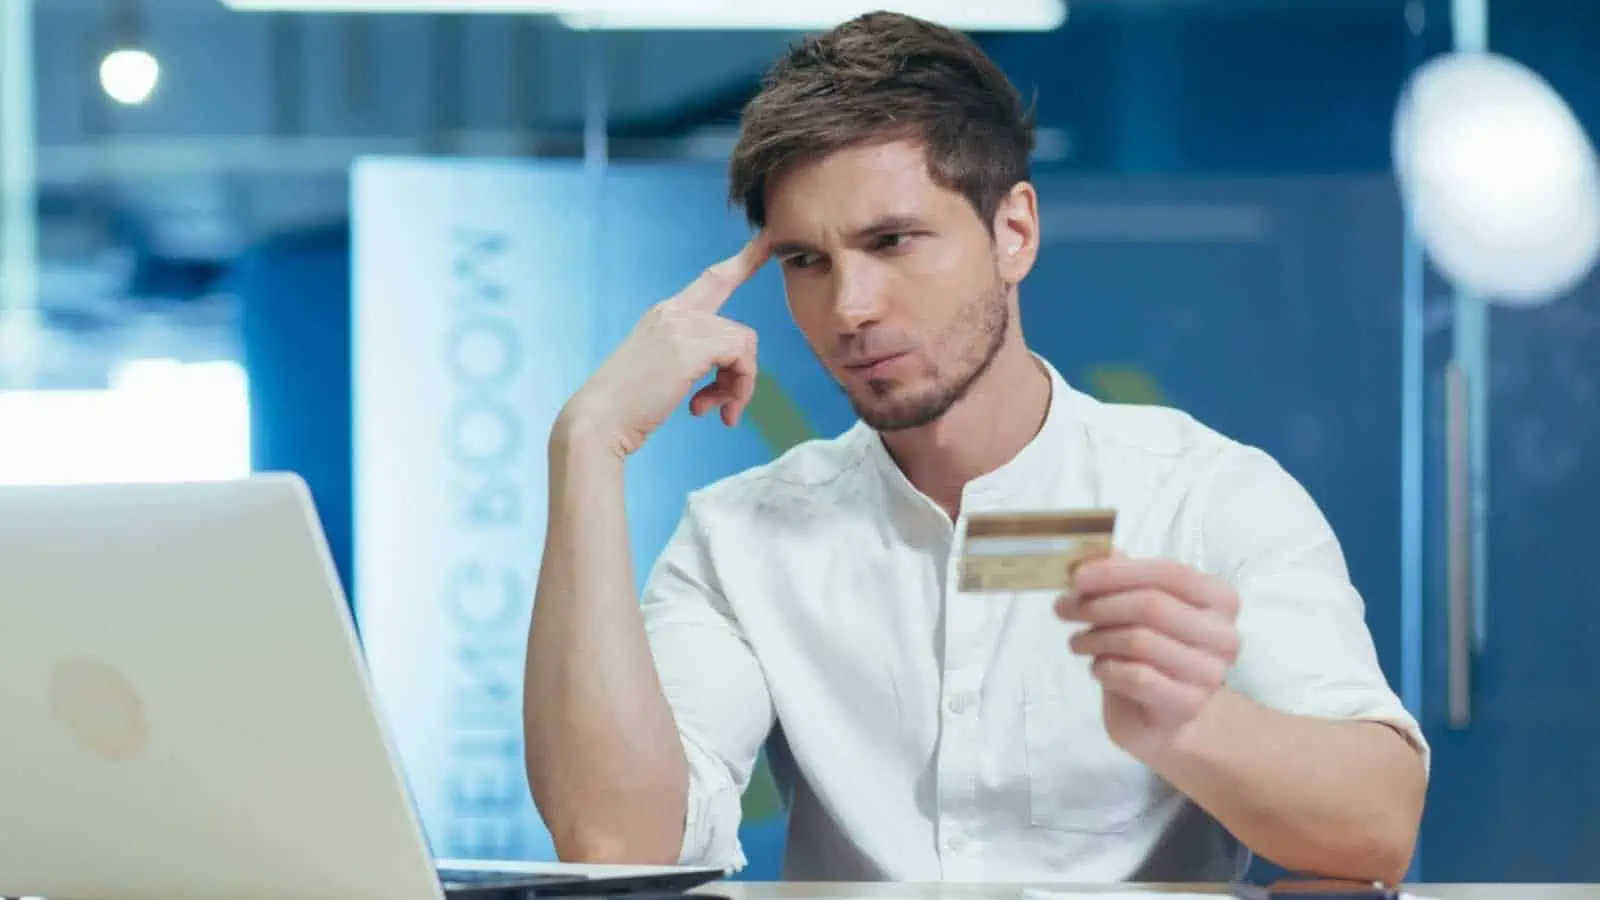 Pensive and frustrated young businessman in the office trying to make a purchase in an online store, uses a laptop holding a bank credit card